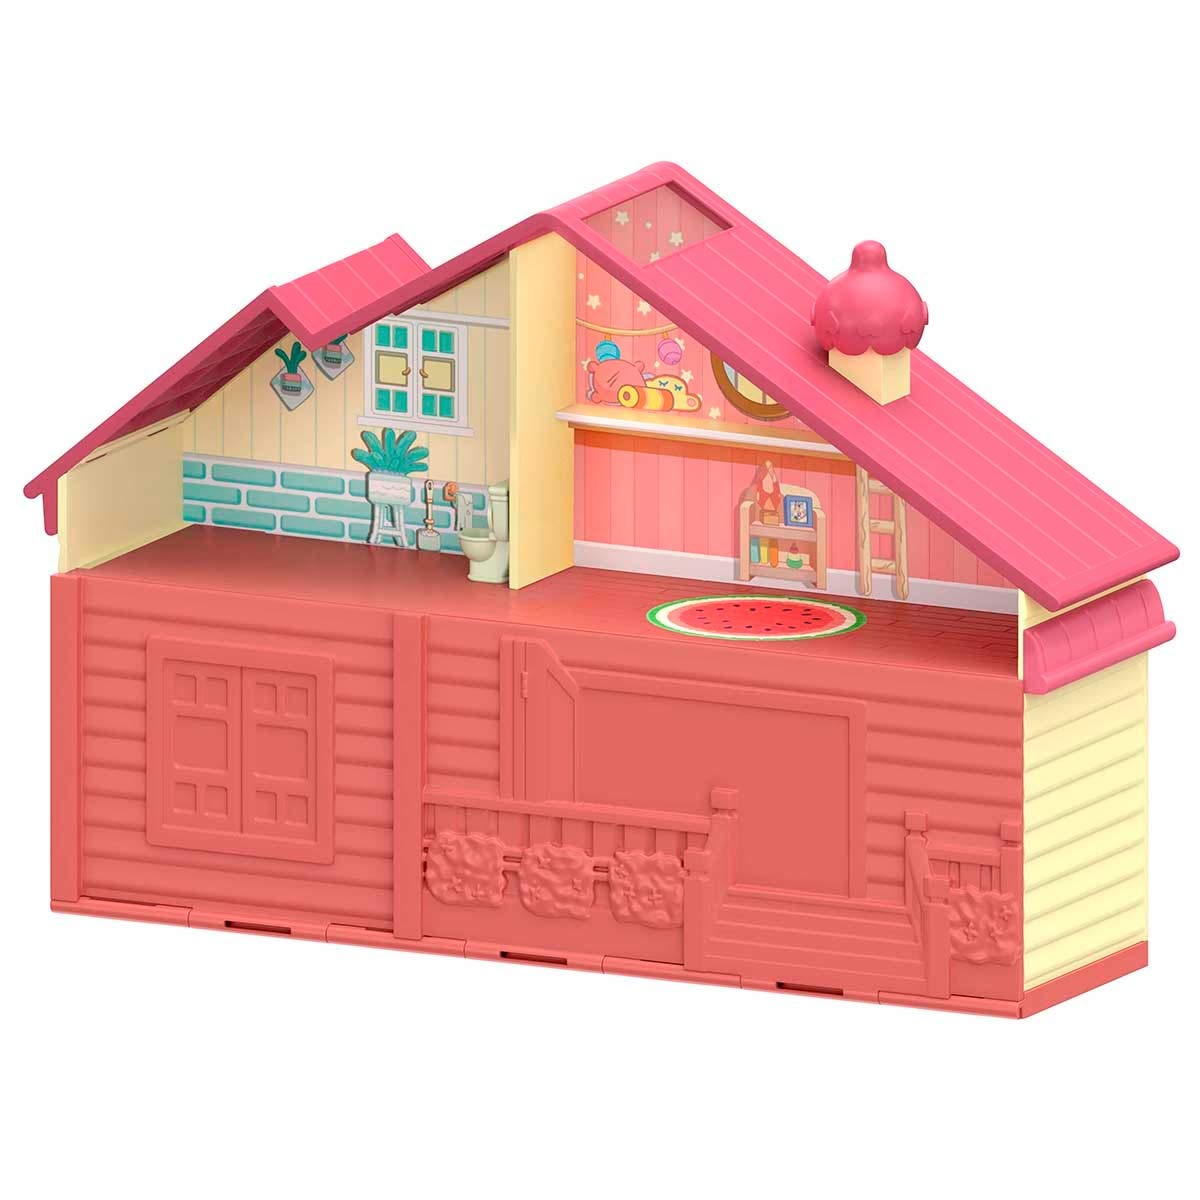 Bluey Family Home Playset with 2.5" poseable Figure